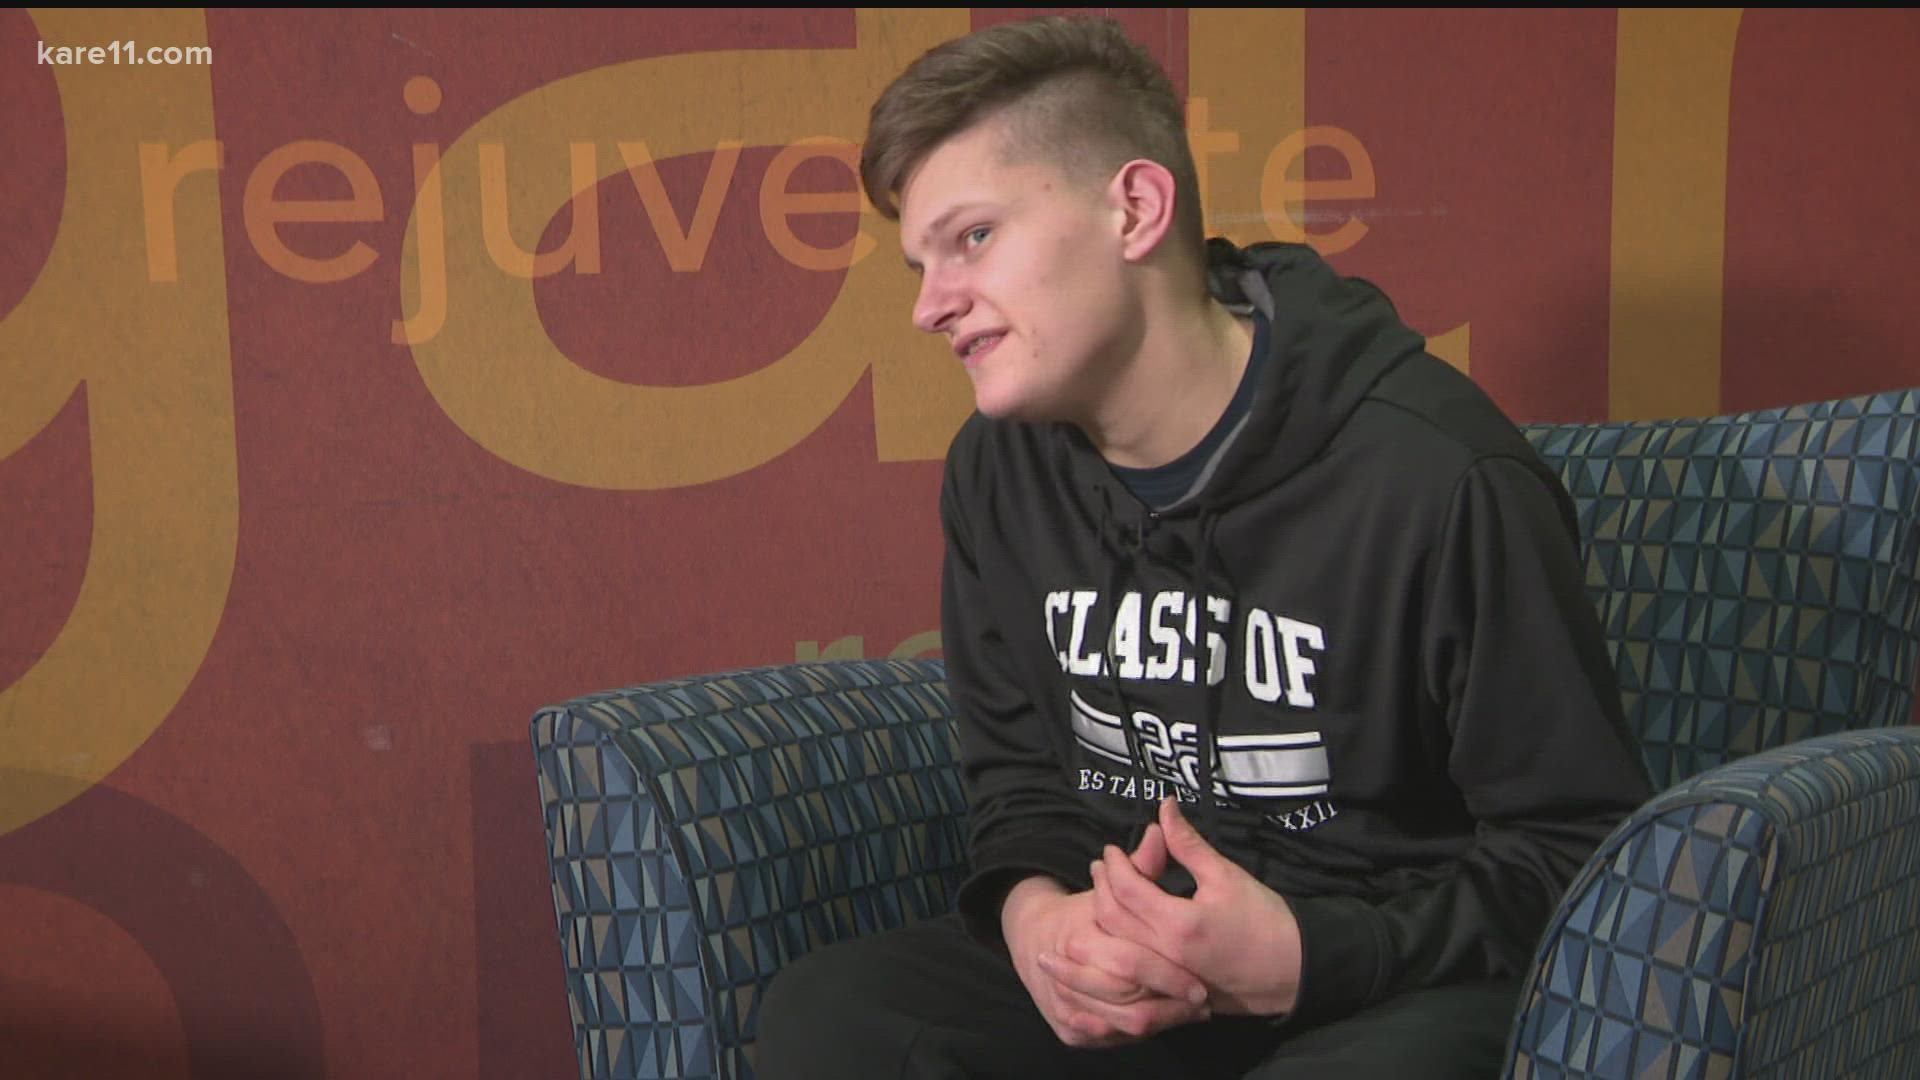 On Communities that KARE, learn about the high school senior who earned his job as "Joy Ambassador" by using his gift of happiness.